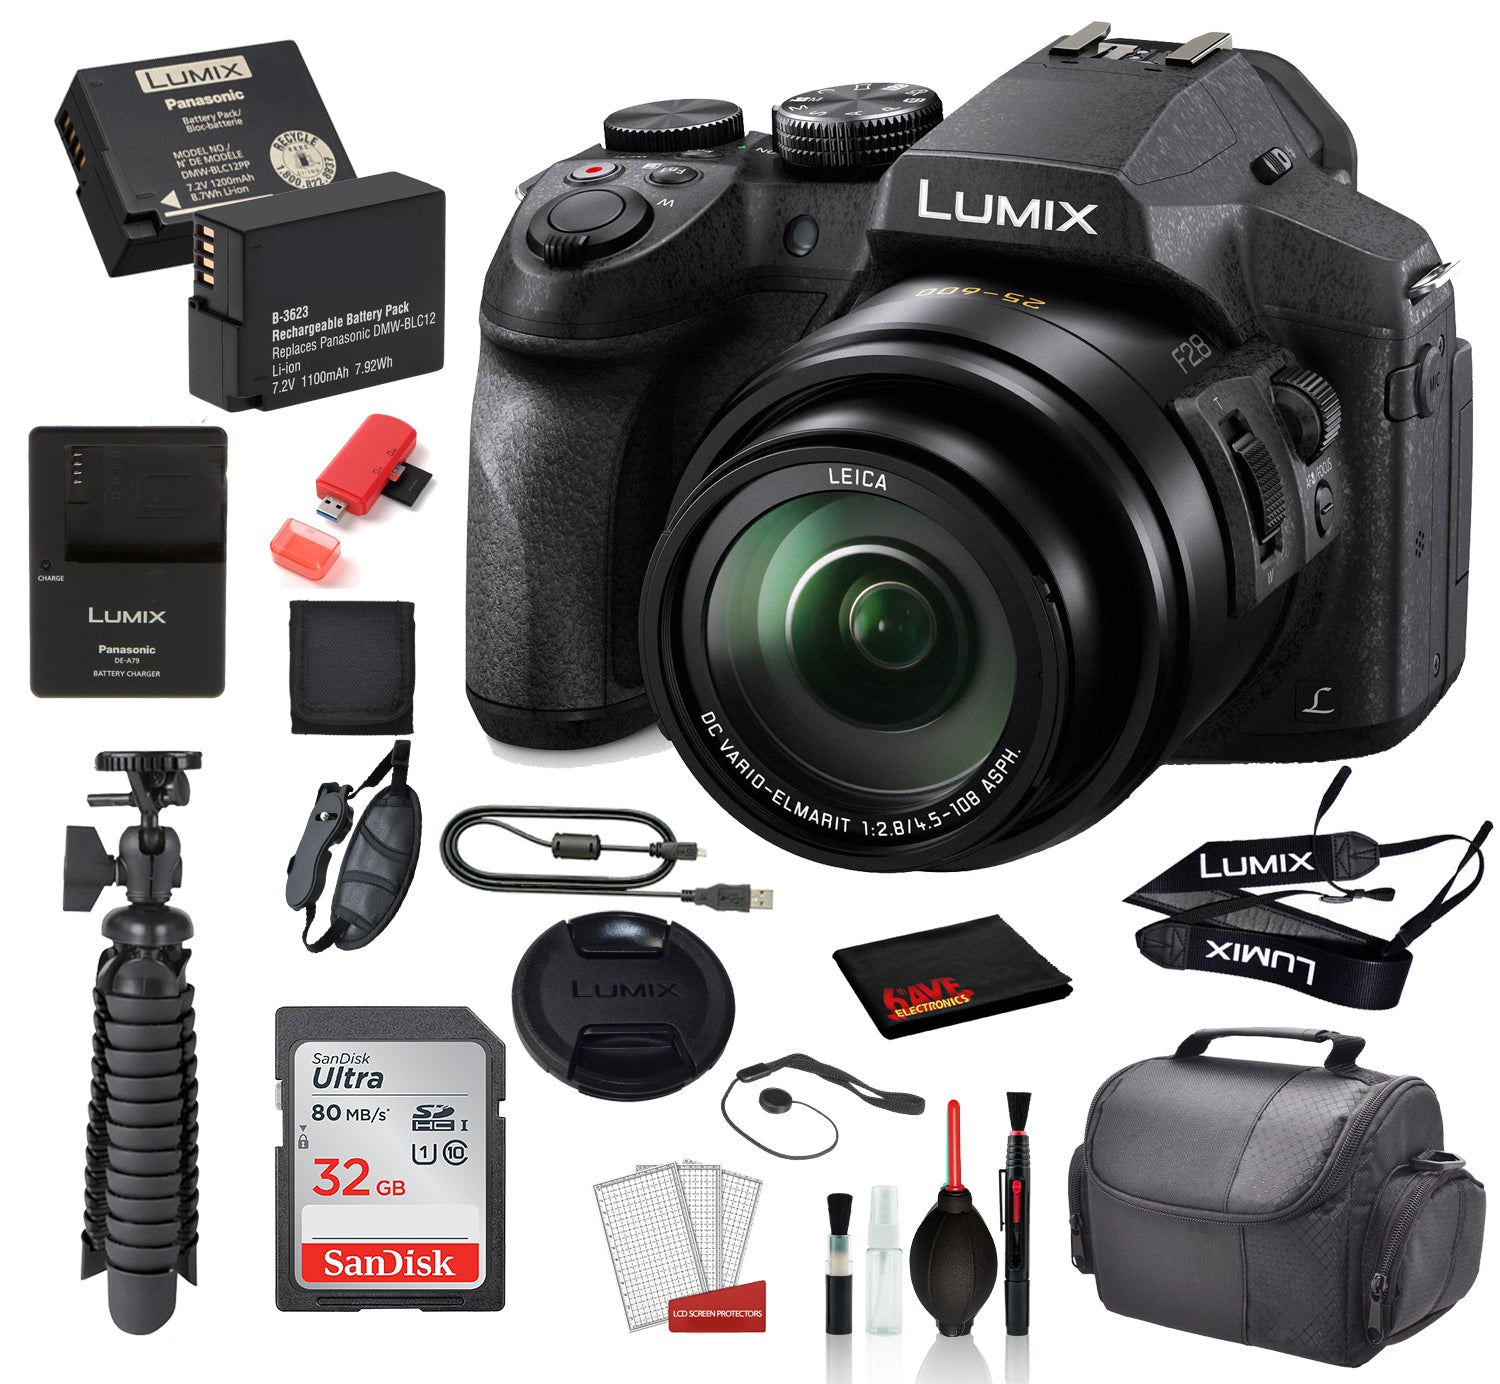 Panasonic Lumix DMC-FZ300 Digital Camera with ?SanDisk 32gb SD card + Replacement Battery for DMW-BLC12 +  MORE